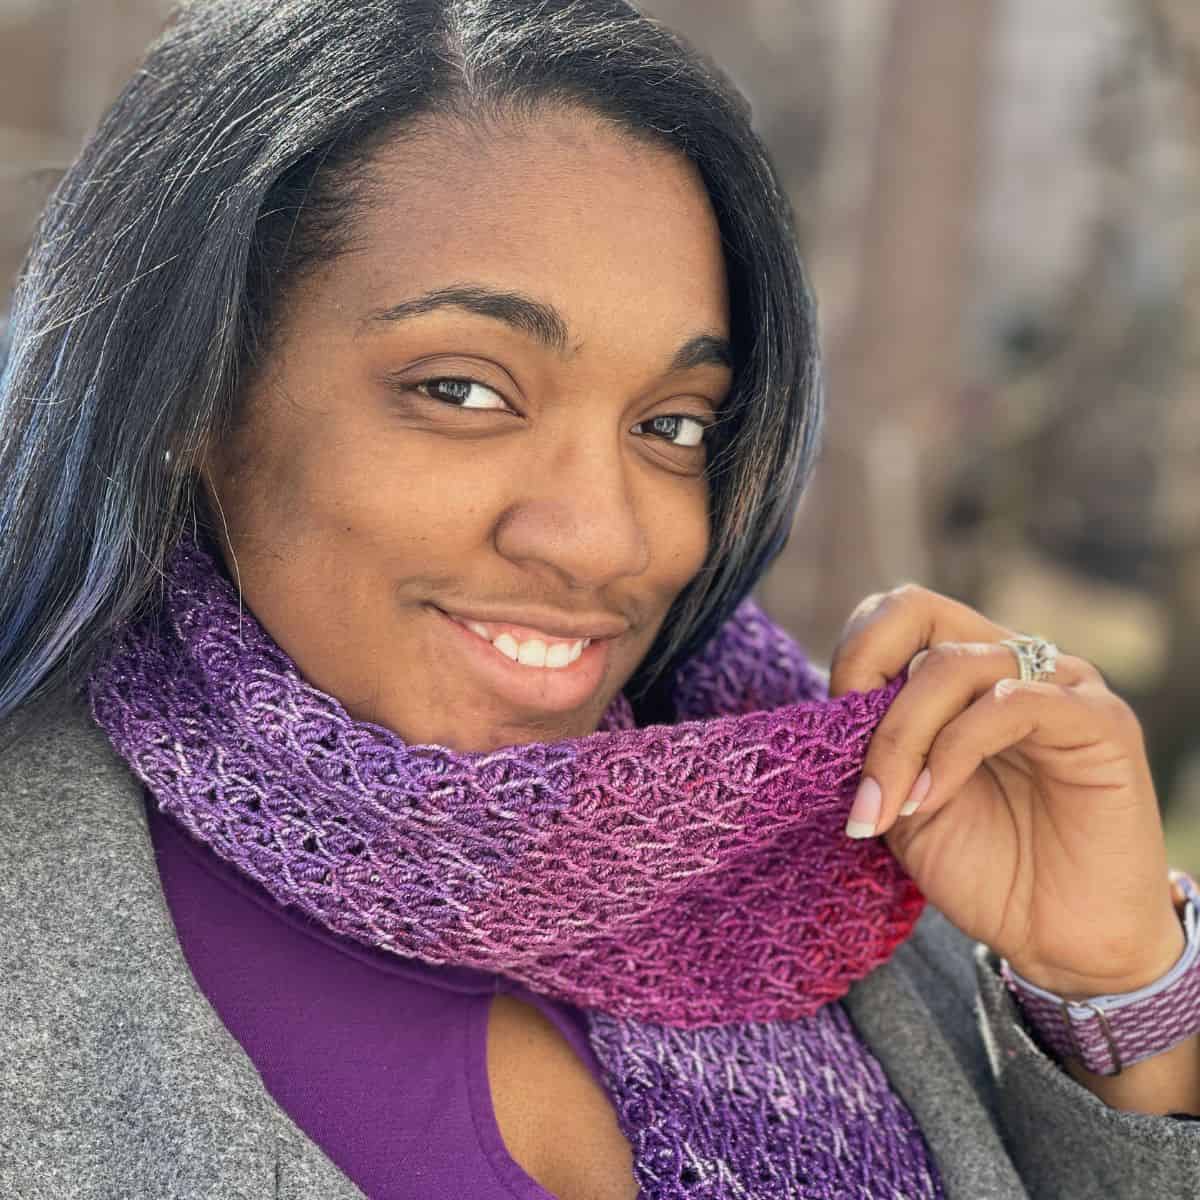 A woman wearing a crochet purple and pink scarf.